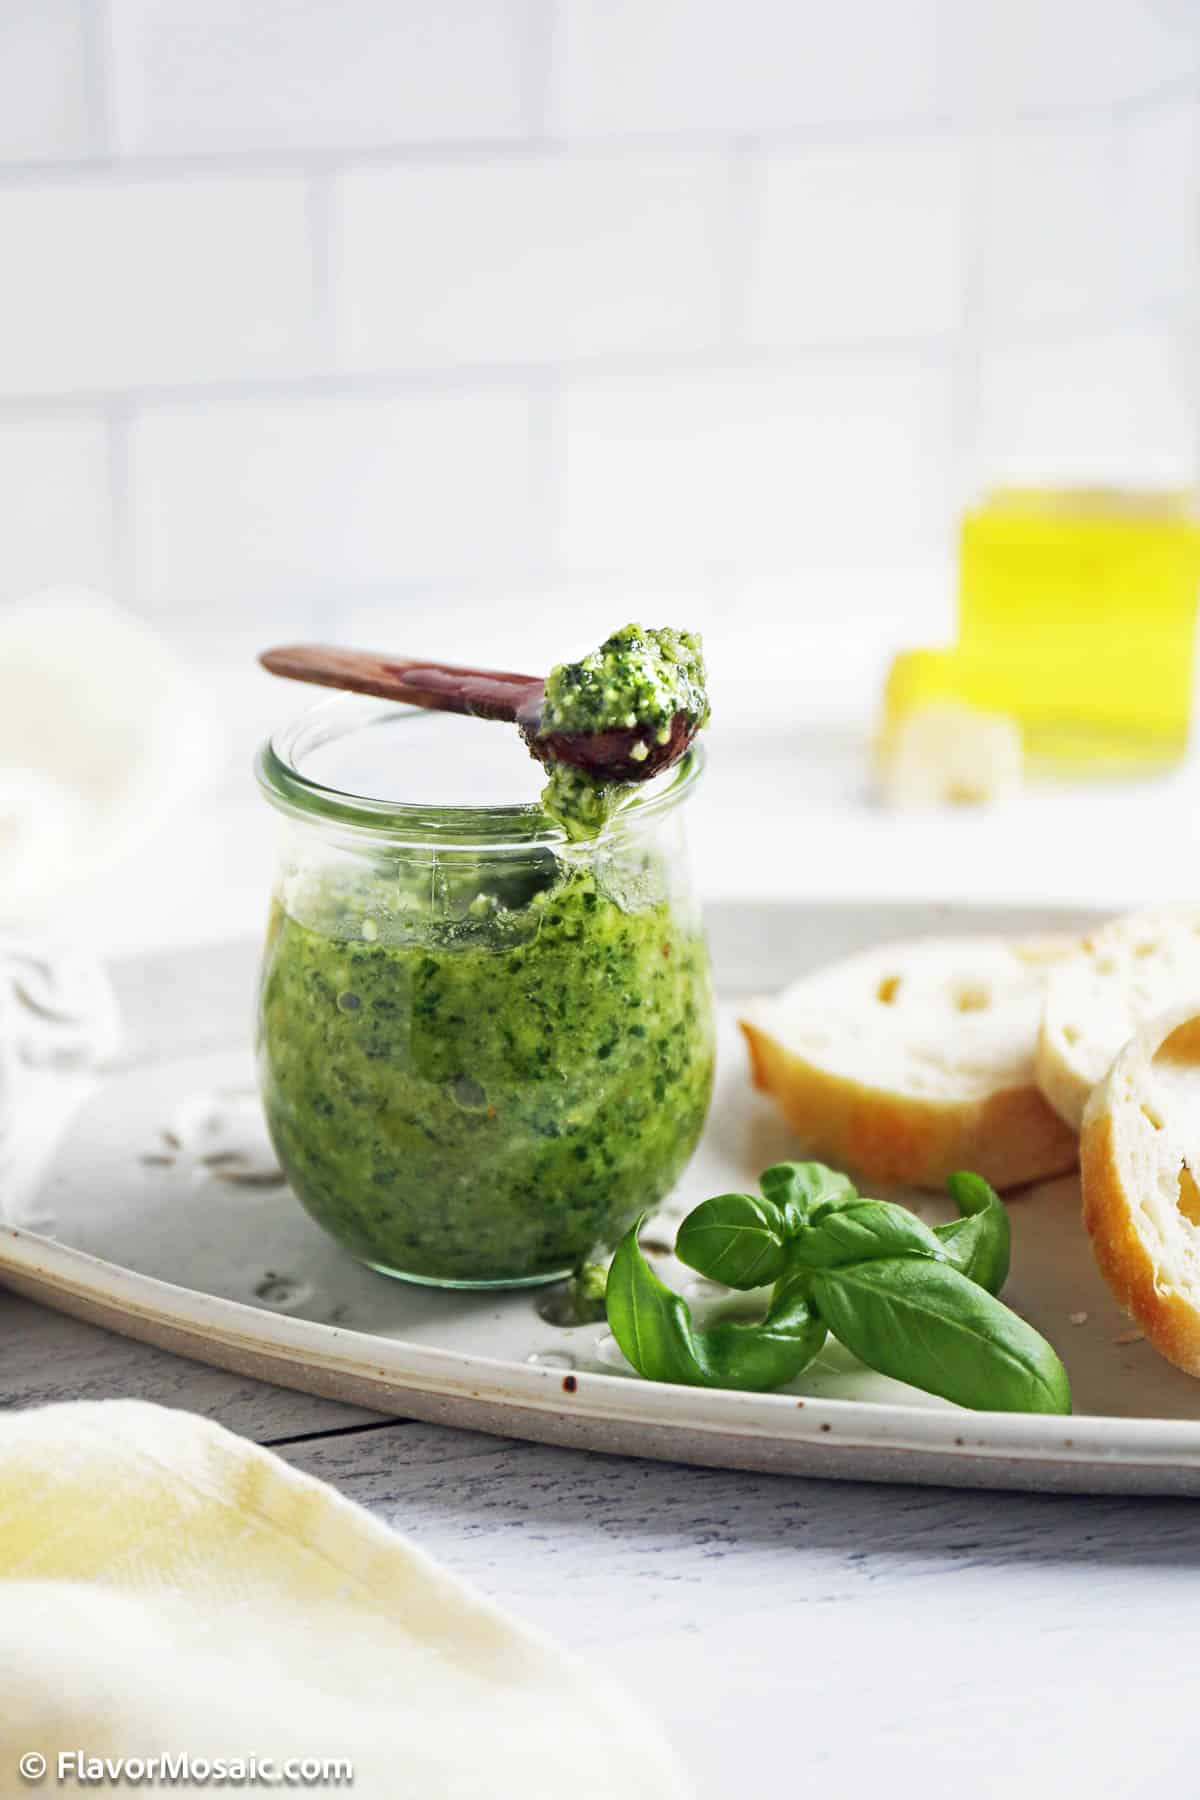 Side view of a jar of basil pesto with a wooden spoonful of pesto sitting on top of the pesto jar.